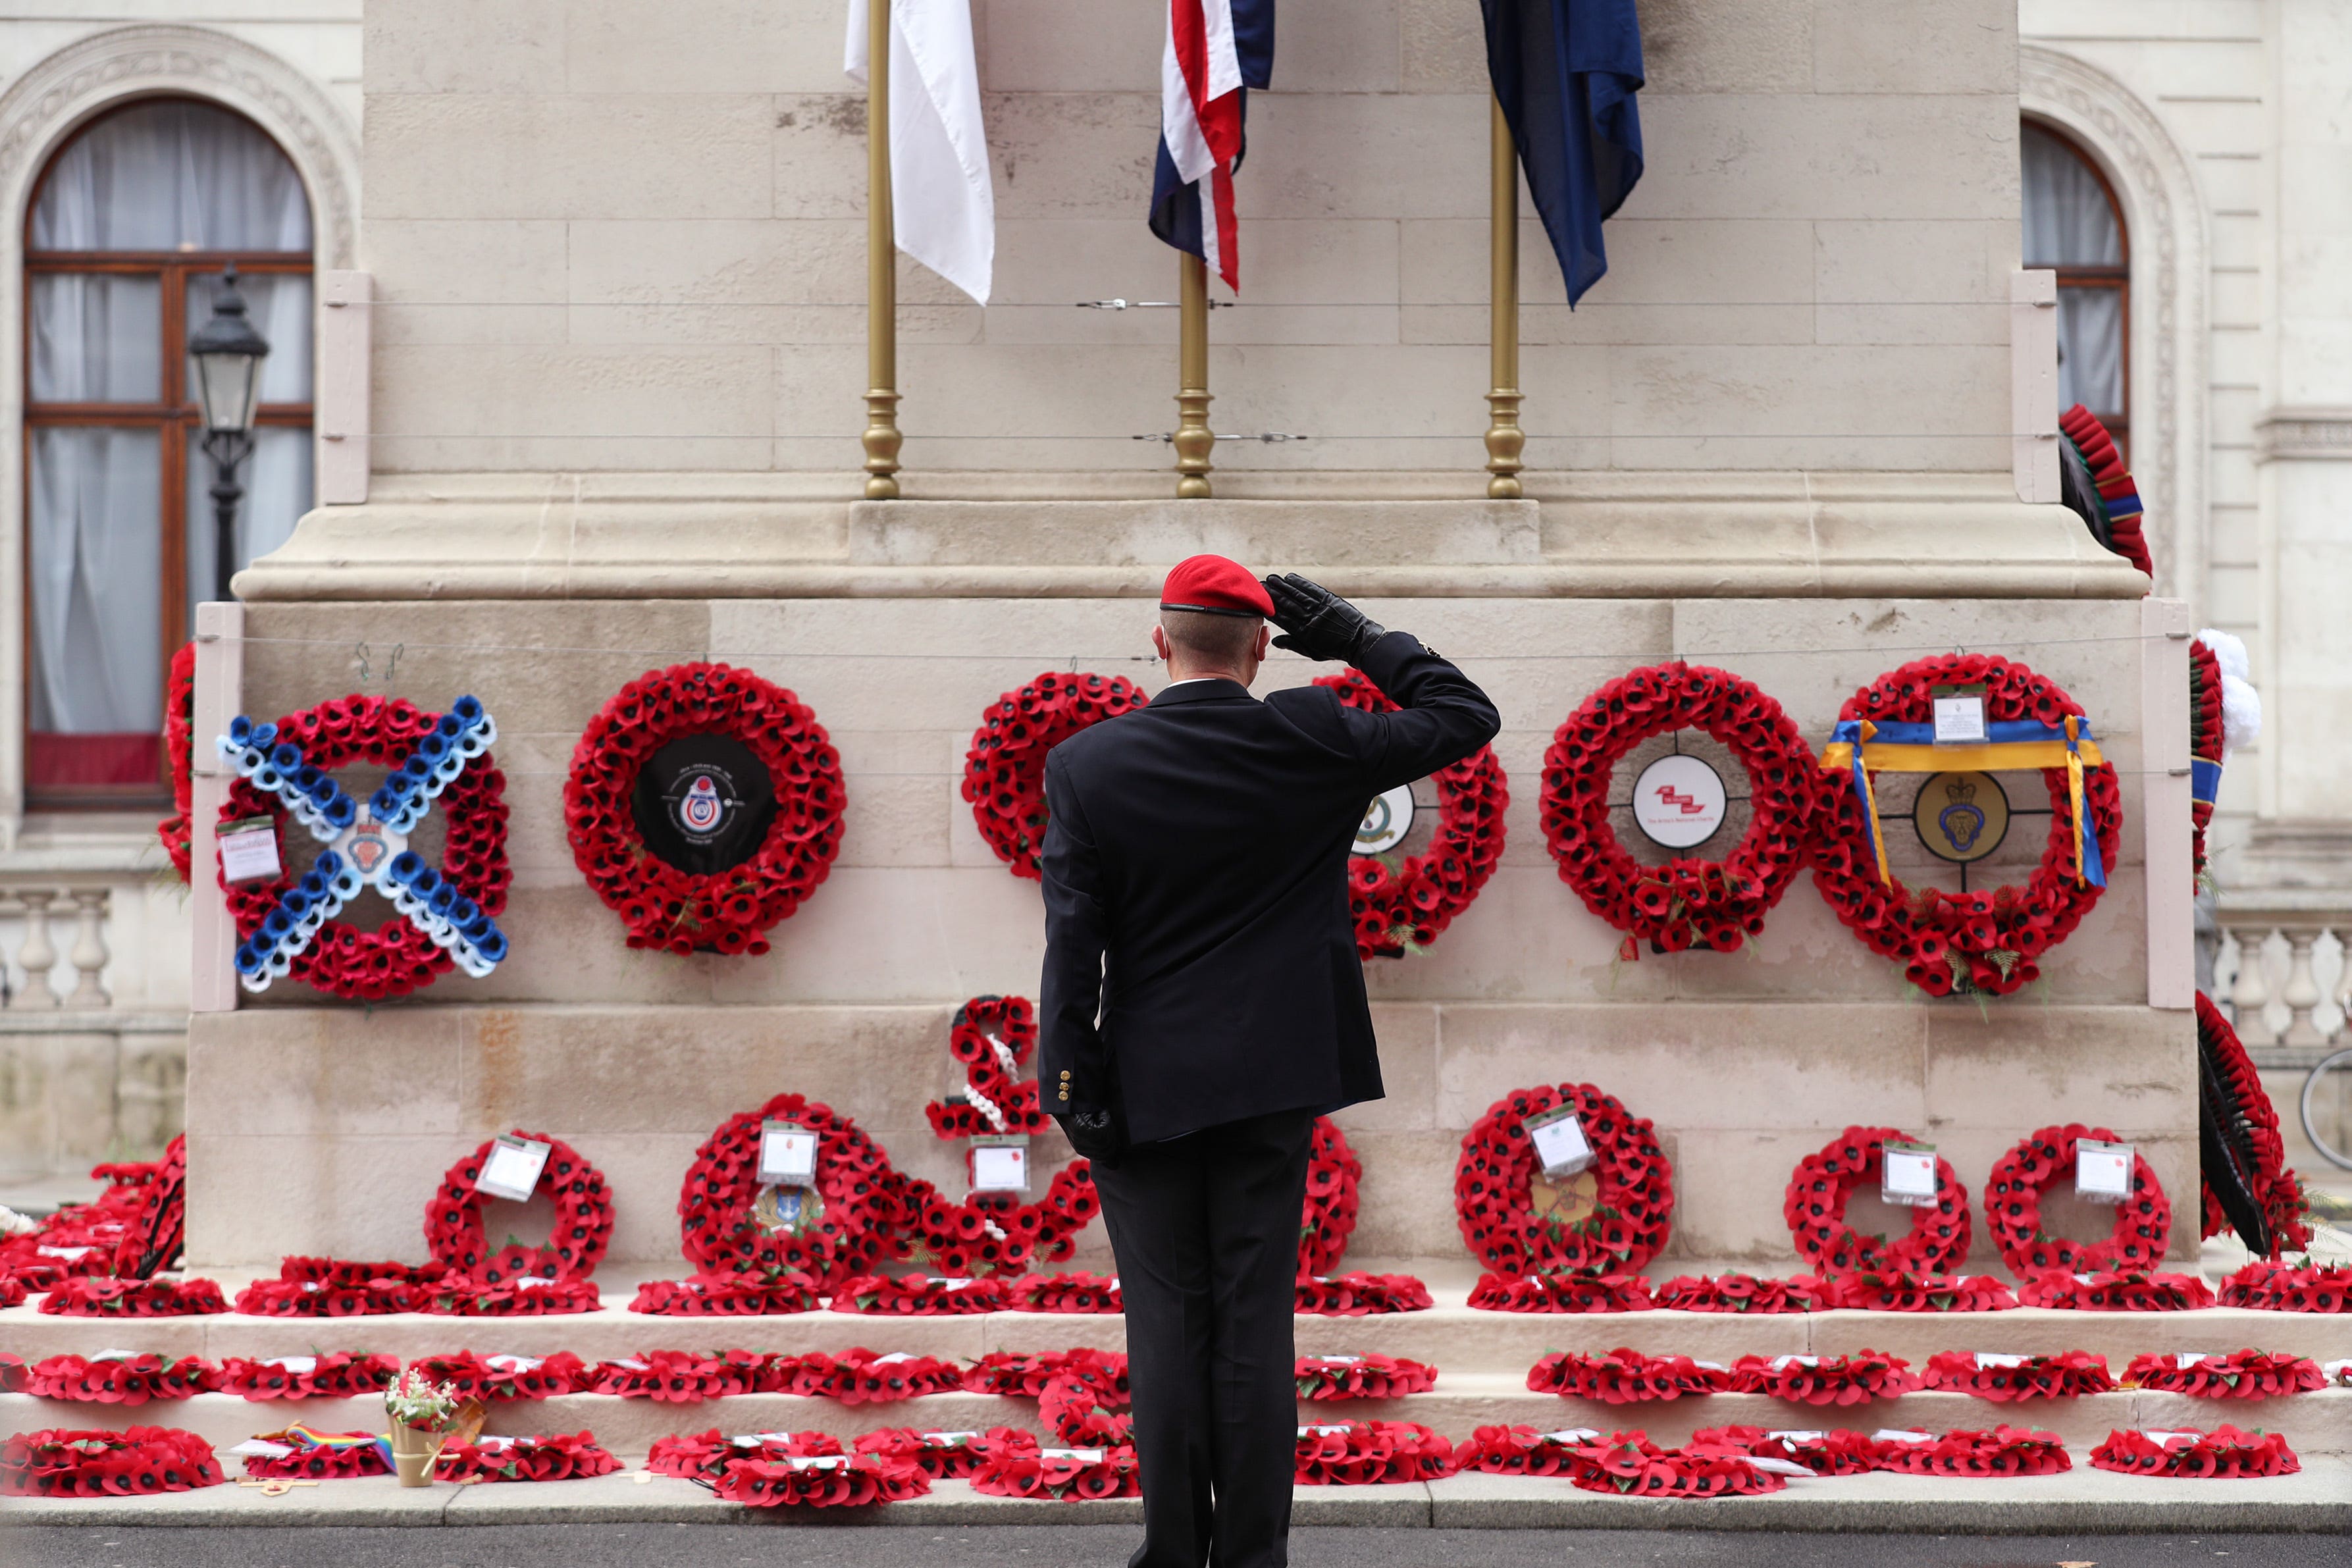 A member of the armed services gives a salute at the Cenotaph on Whitehall on Armistice Day 2020